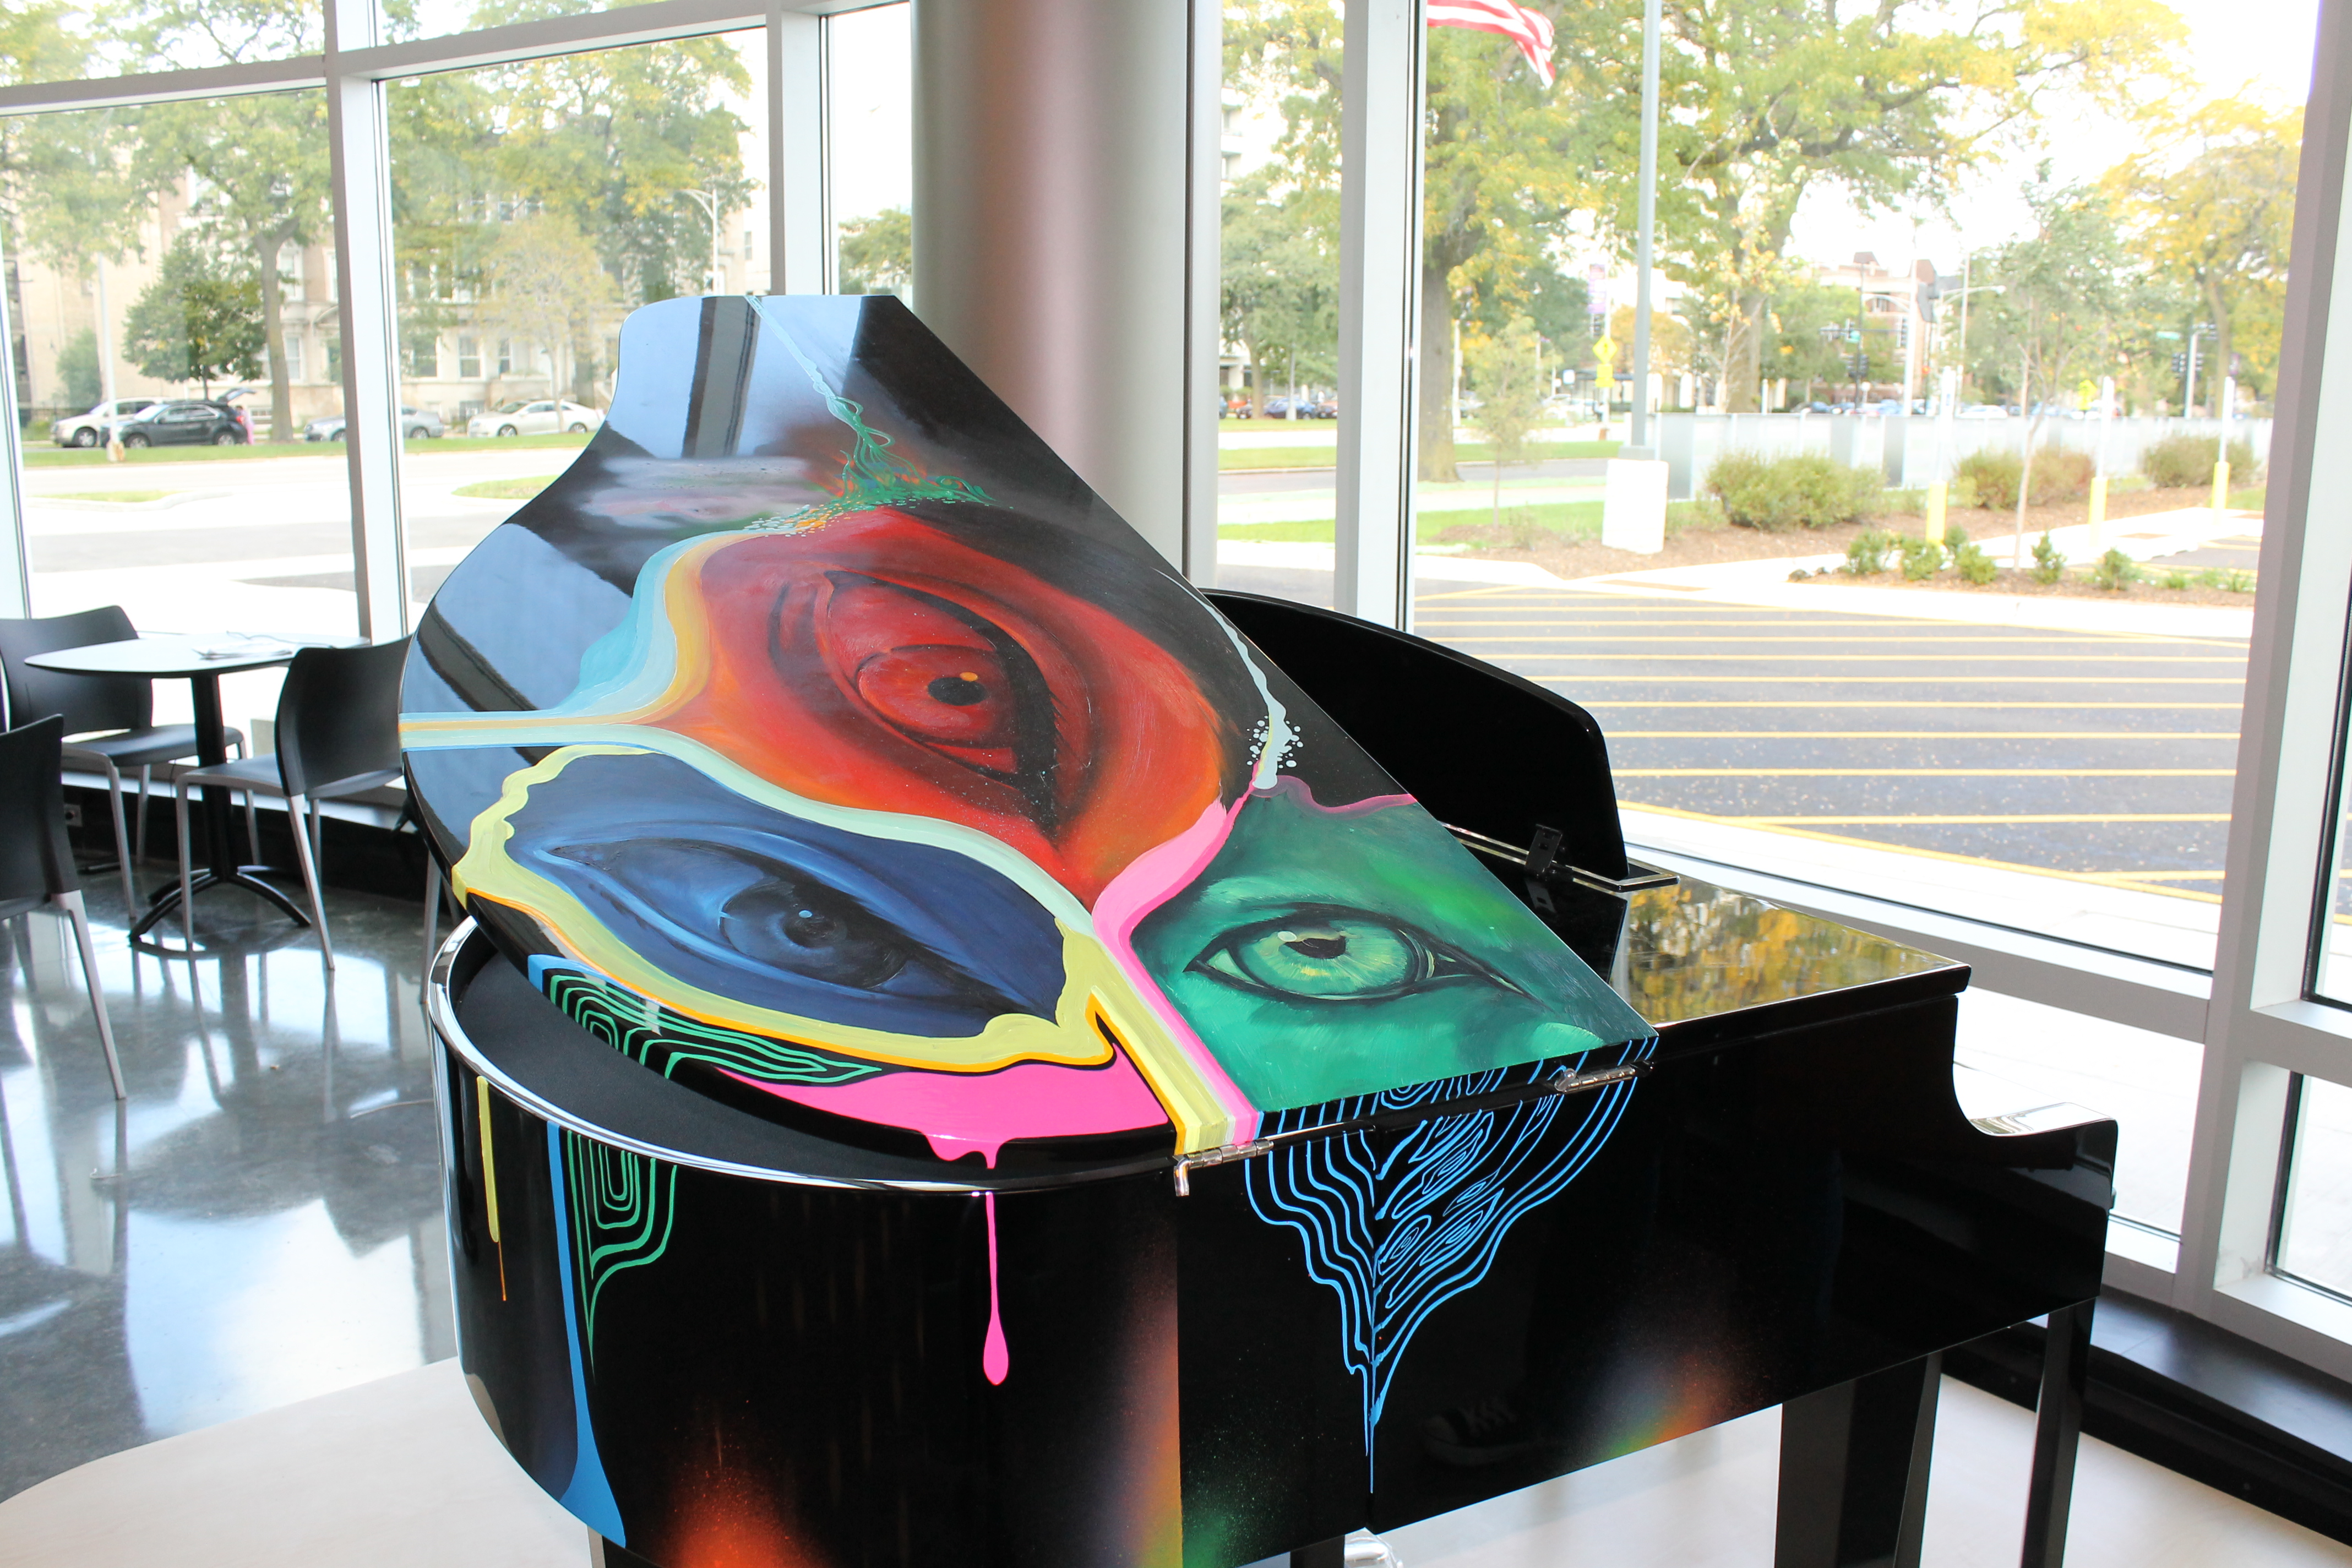 Piano in Mariano's Bronzeville, painted by renowned Chicago artist Hebru Brantley / Photo: Arionne Nettles